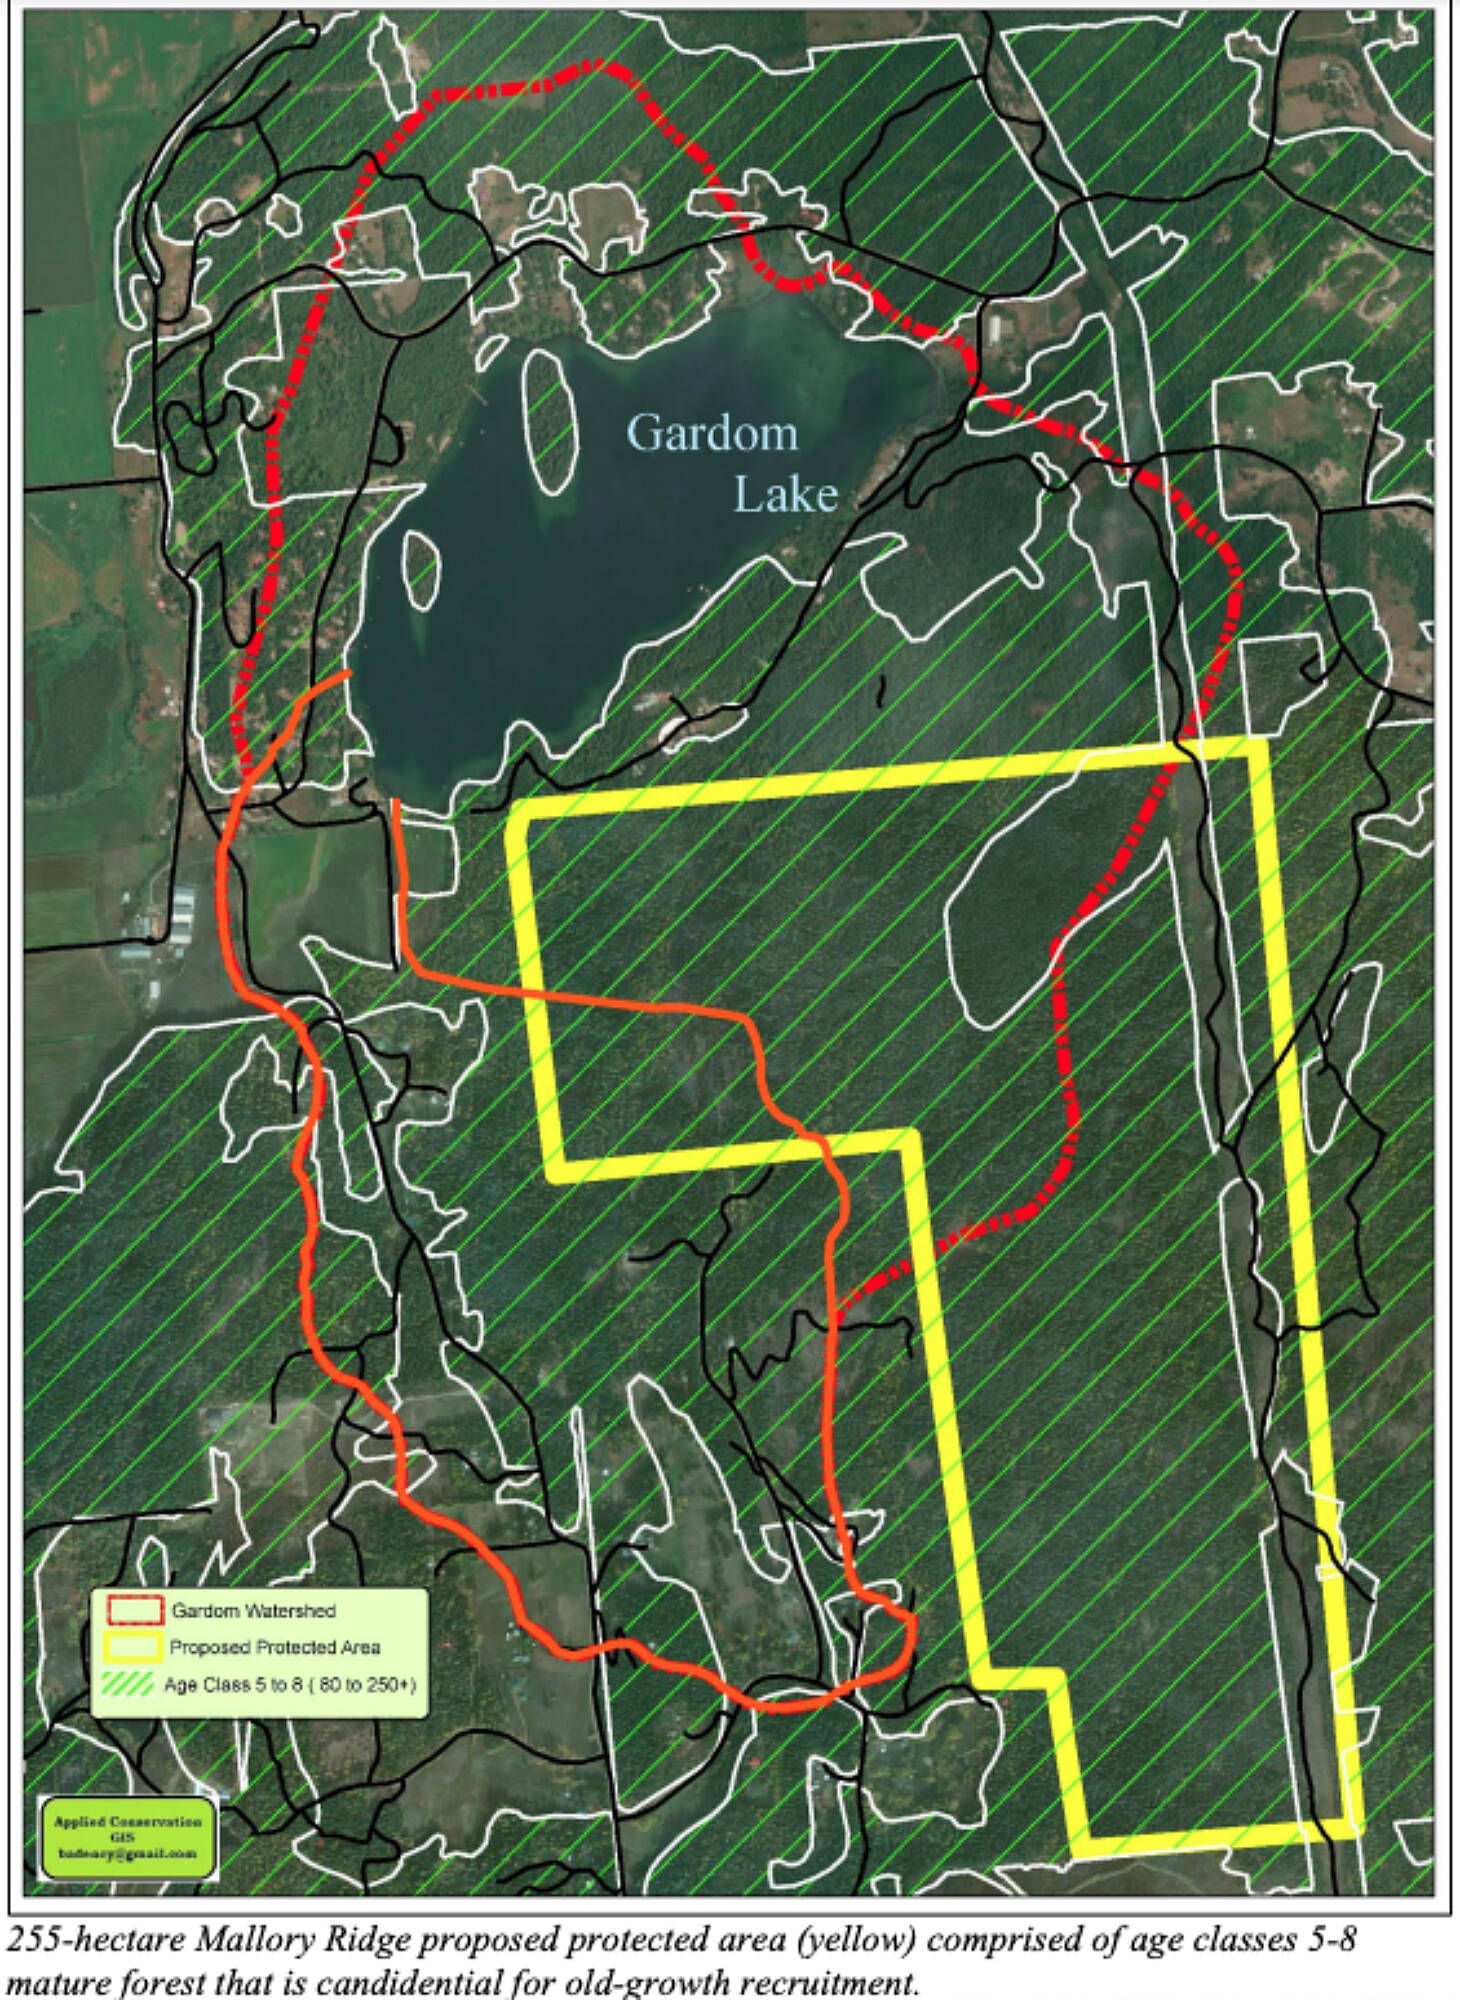 255-hectare Mallory Ridge proposed protected area (yellow).